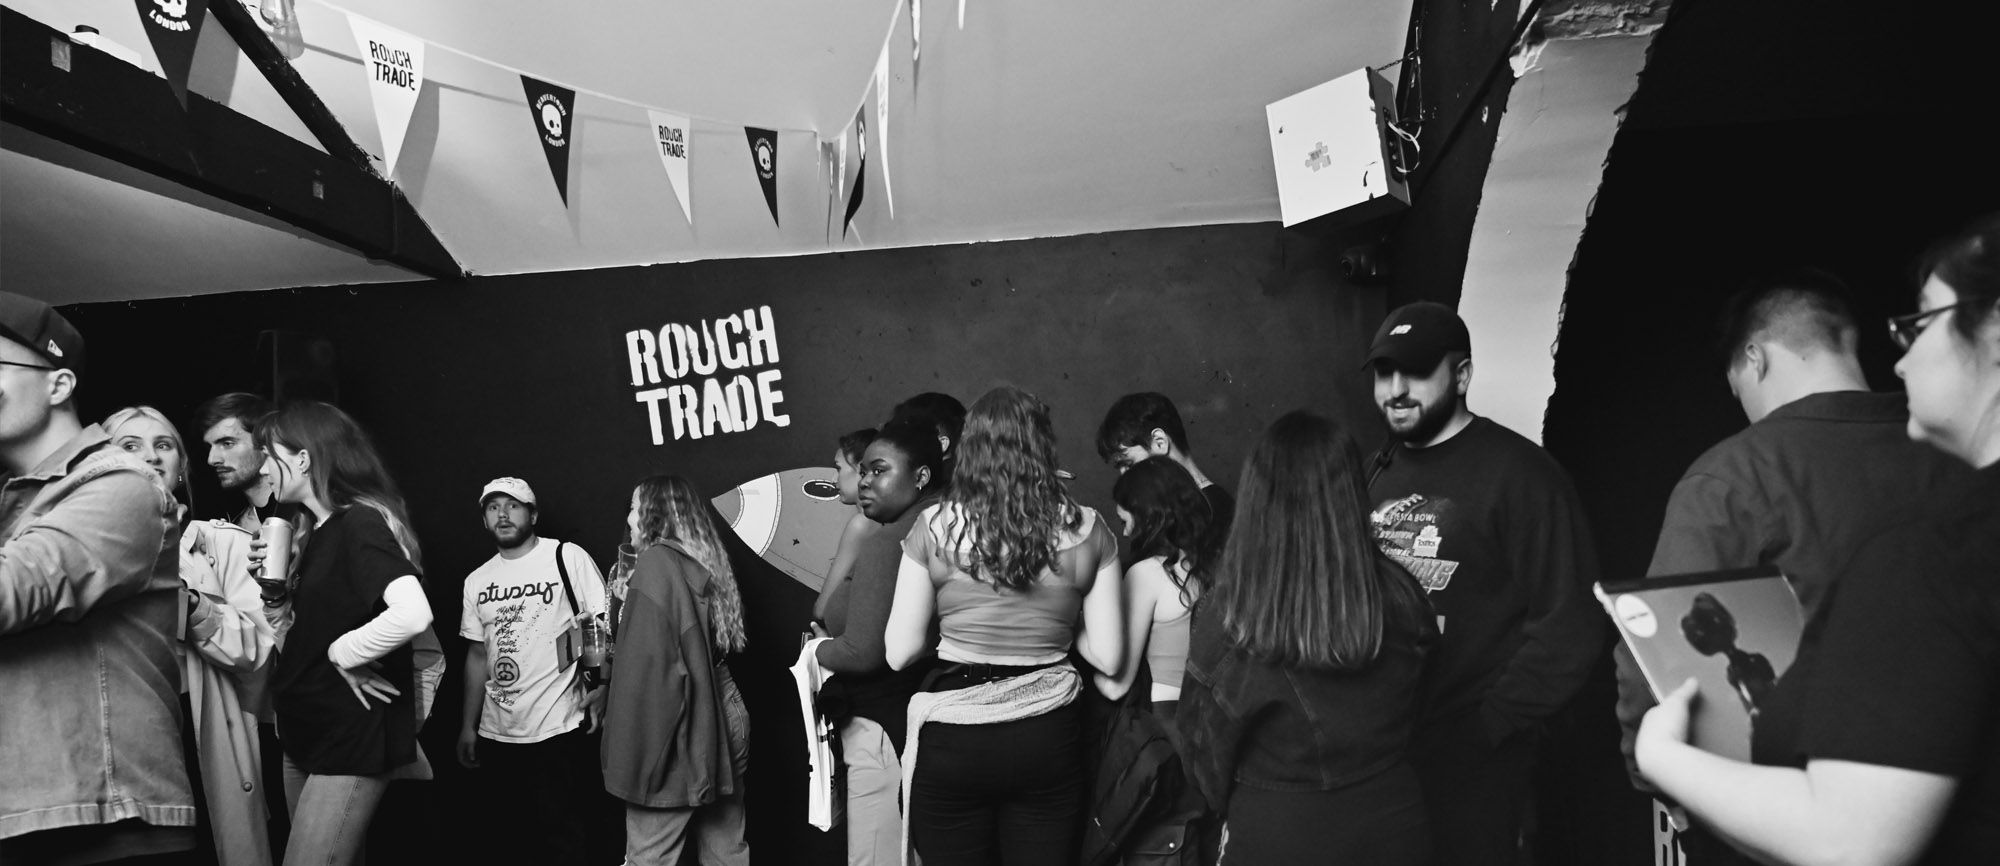 Live Events At Rough Trade: What to Expect